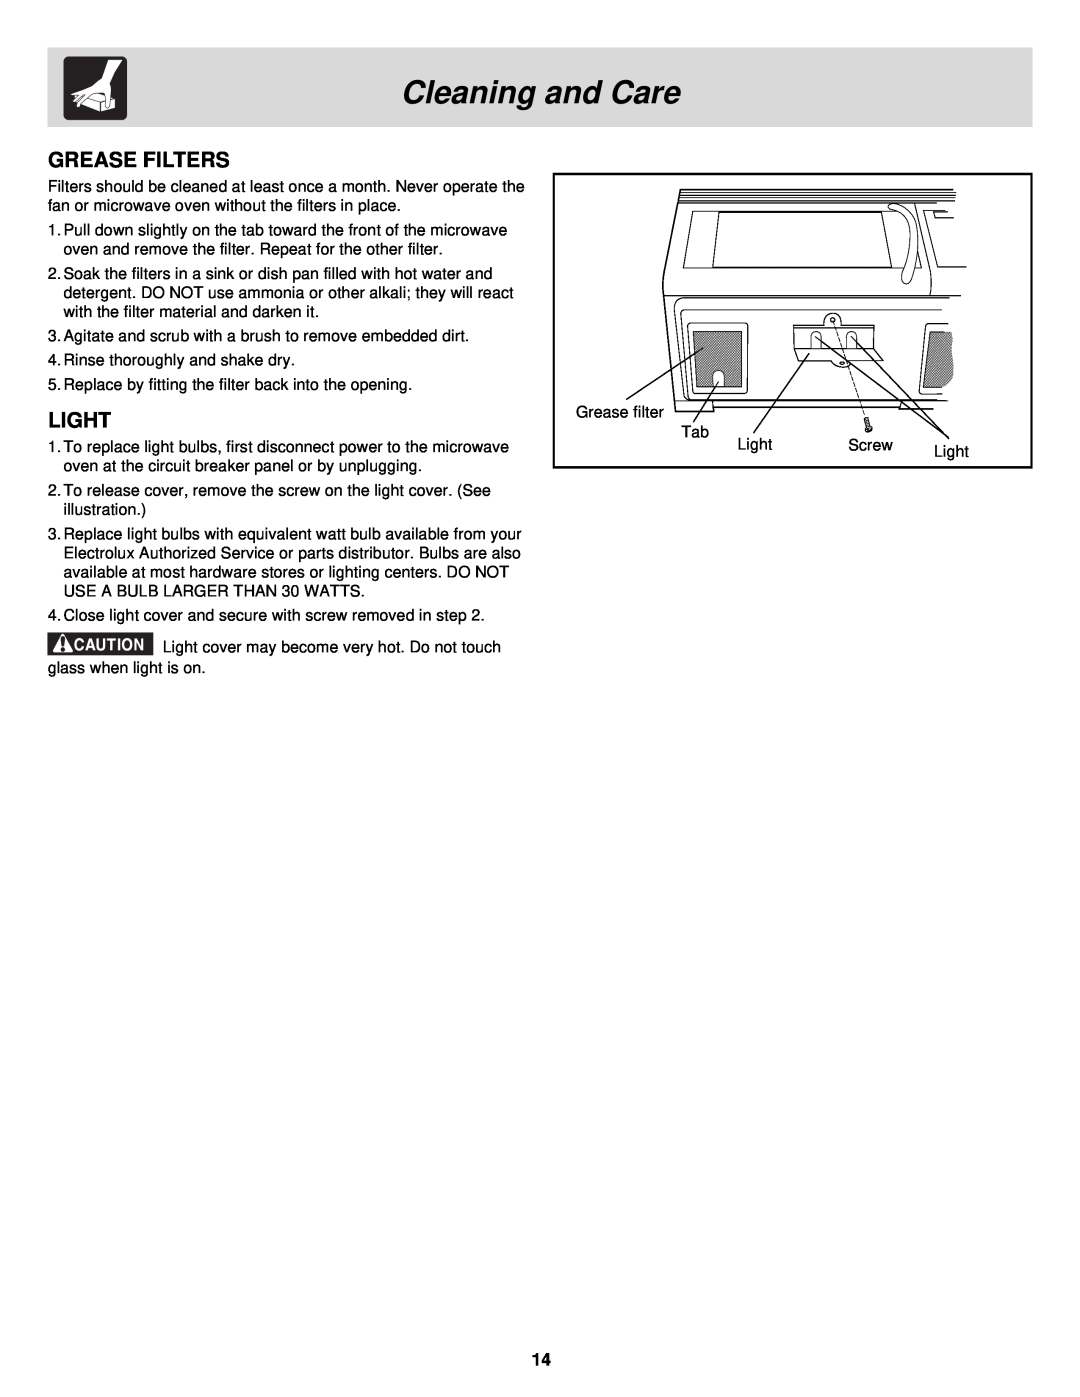 Frigidaire DQ, FMV156DB, DC, DS important safety instructions Grease Filters, Cleaning and Care, Light 